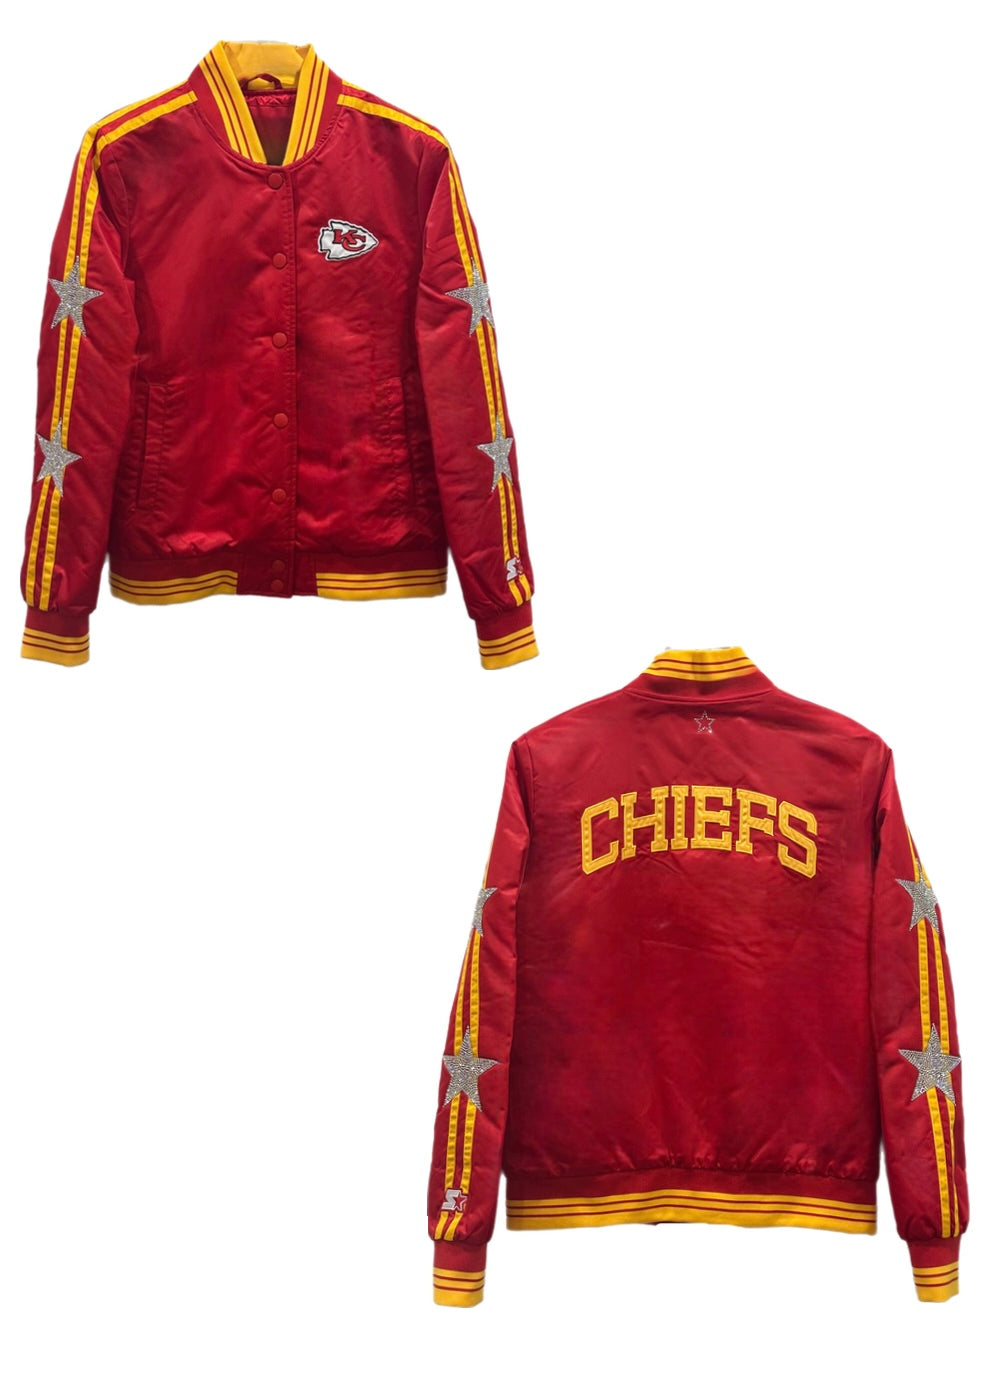 Kansas City Chiefs, NFL One of a KIND ”Rare Find” Vintage Jacket with Crystal Star Design